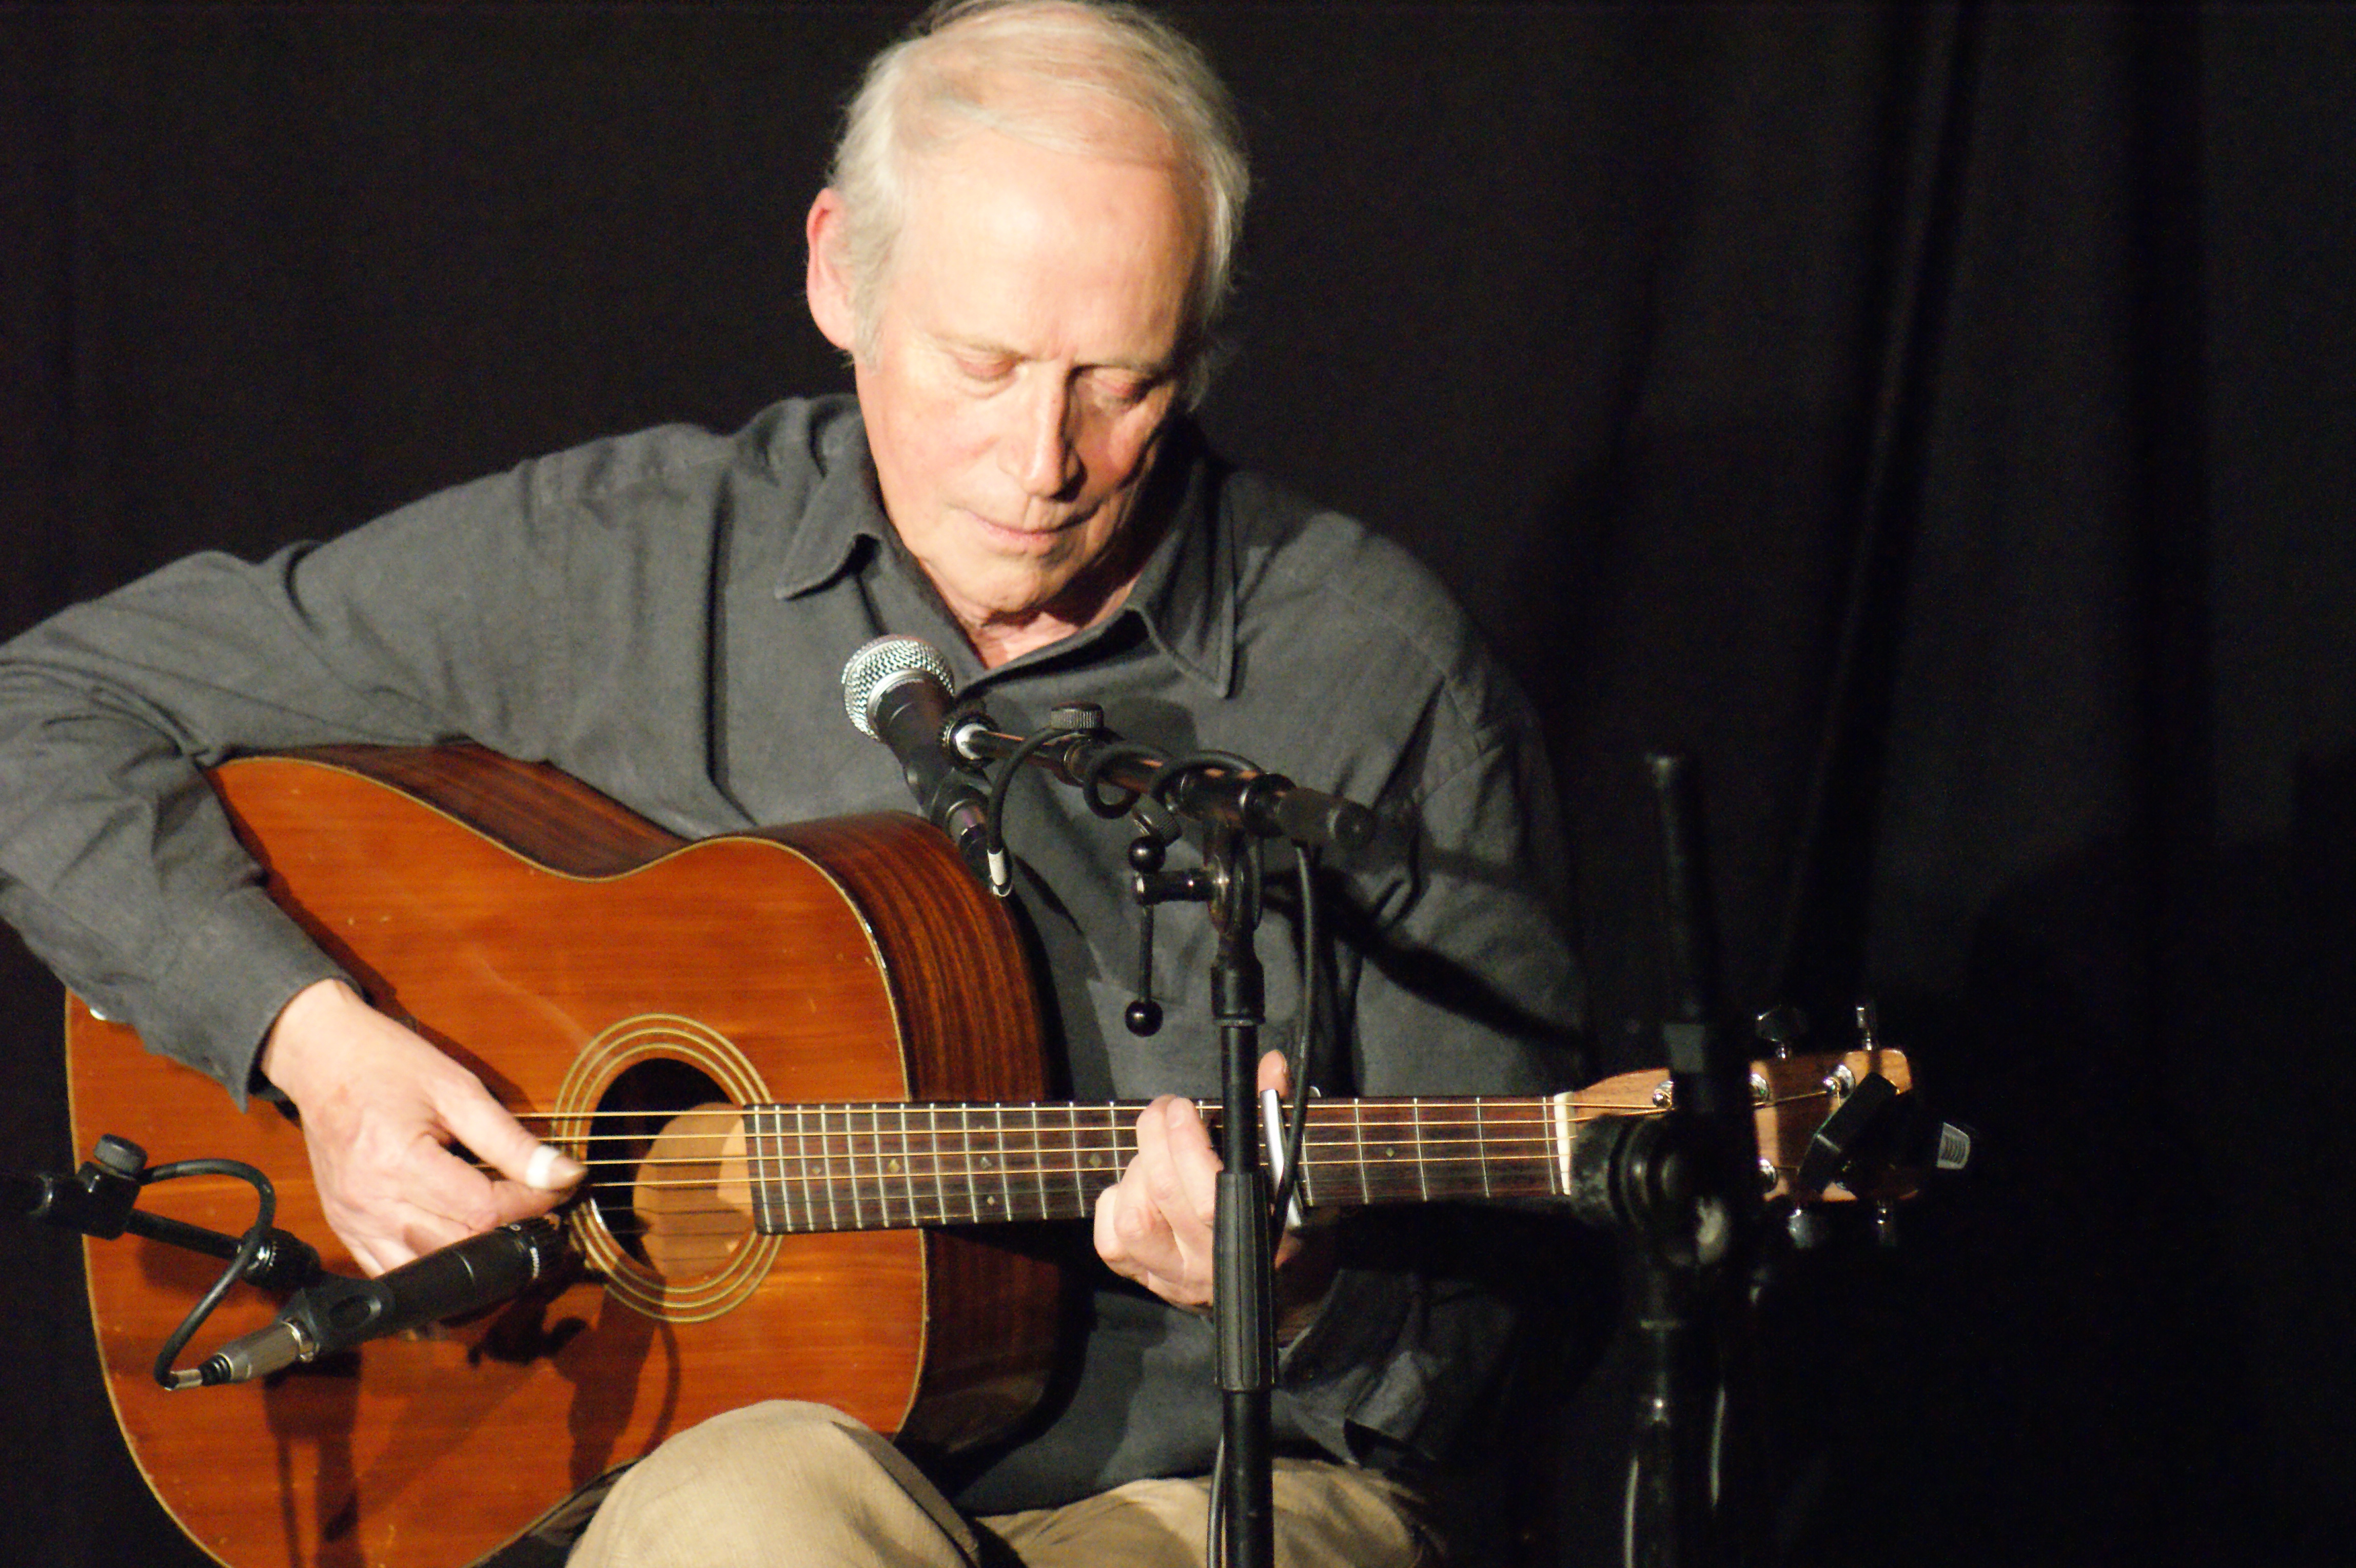 A legend of folk music, Archie Fisher, will appear in a house concert in Fort Bragg 11/11/16.